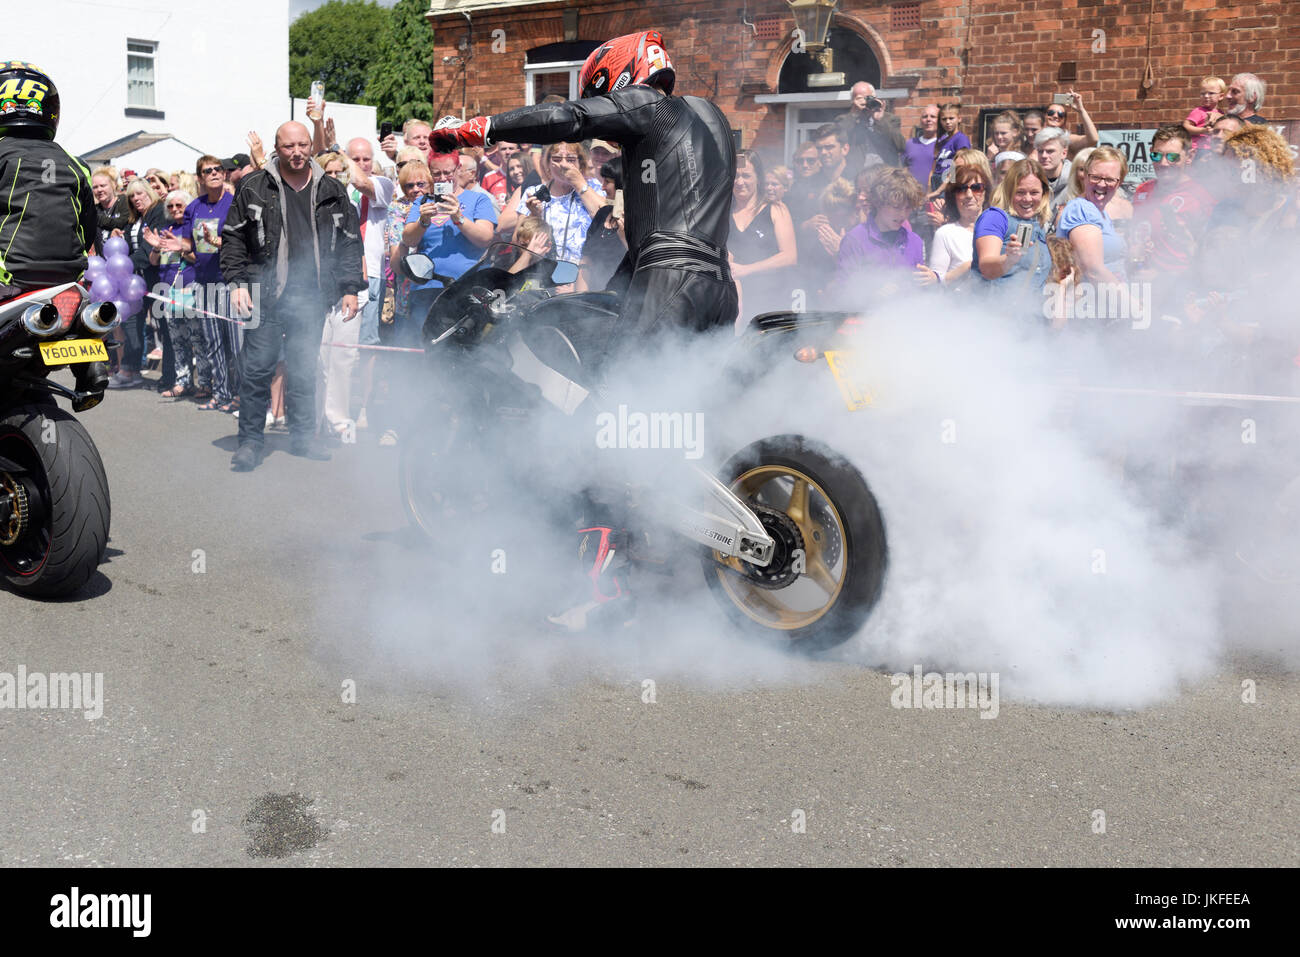 Beeston, Nottinghamshire, UK. 23rd July 2017. Nottinghamshire bikers’ group, Nottz Bikerz held a charity motorcycle run for Owen Jenkins.Owen drowned in the river Trent trying to save a young girl who was in trouble in the water.Thousands of motorcyclist turn up along with members of the public and Owens family members.Biker does burn-out in Owens honour. Credit: Ian Francis/Alamy Live News Stock Photo